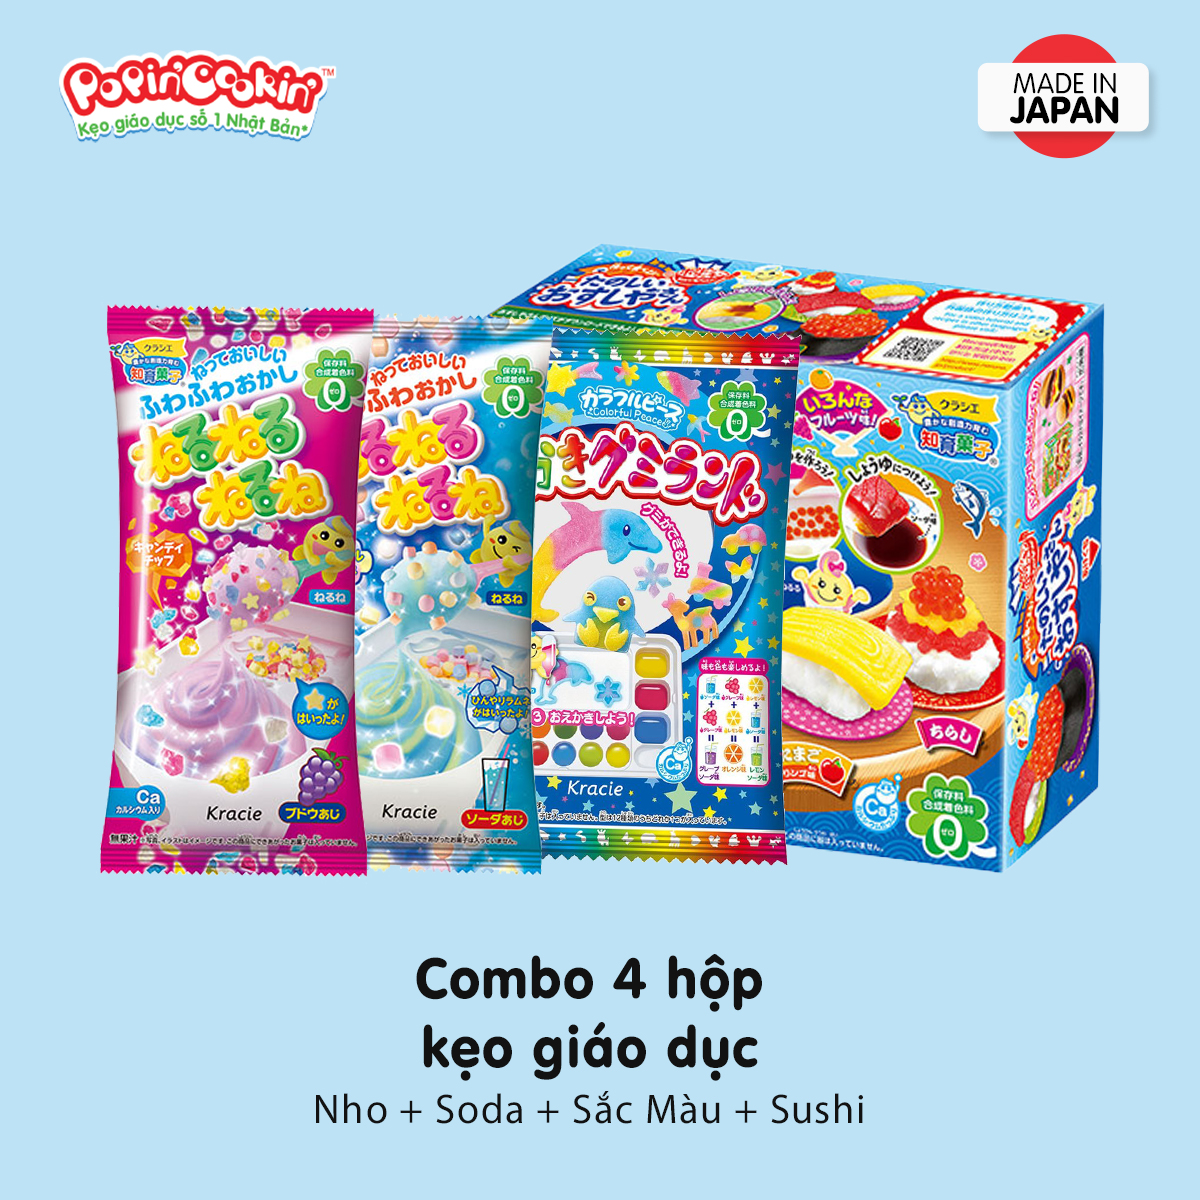 Combo of 4 creative candy boxes Popin Cookin edible toys include Color